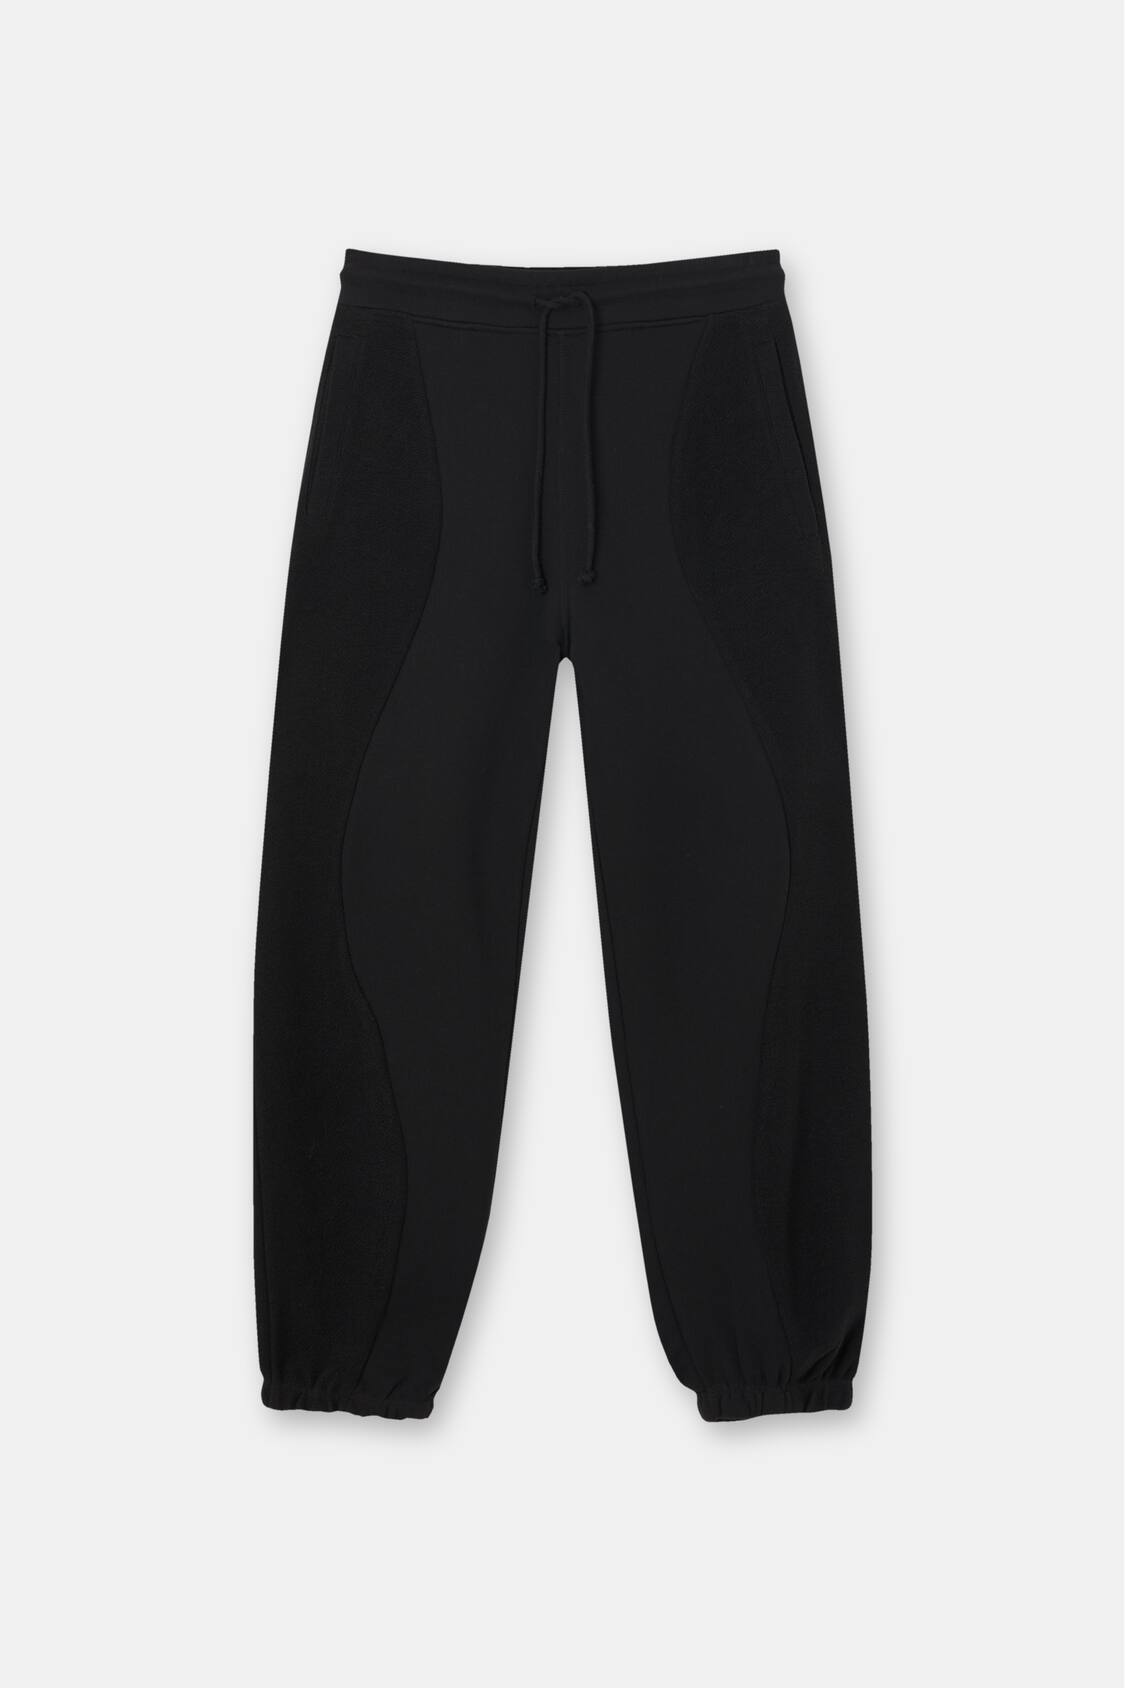 Black joggers with seam detail